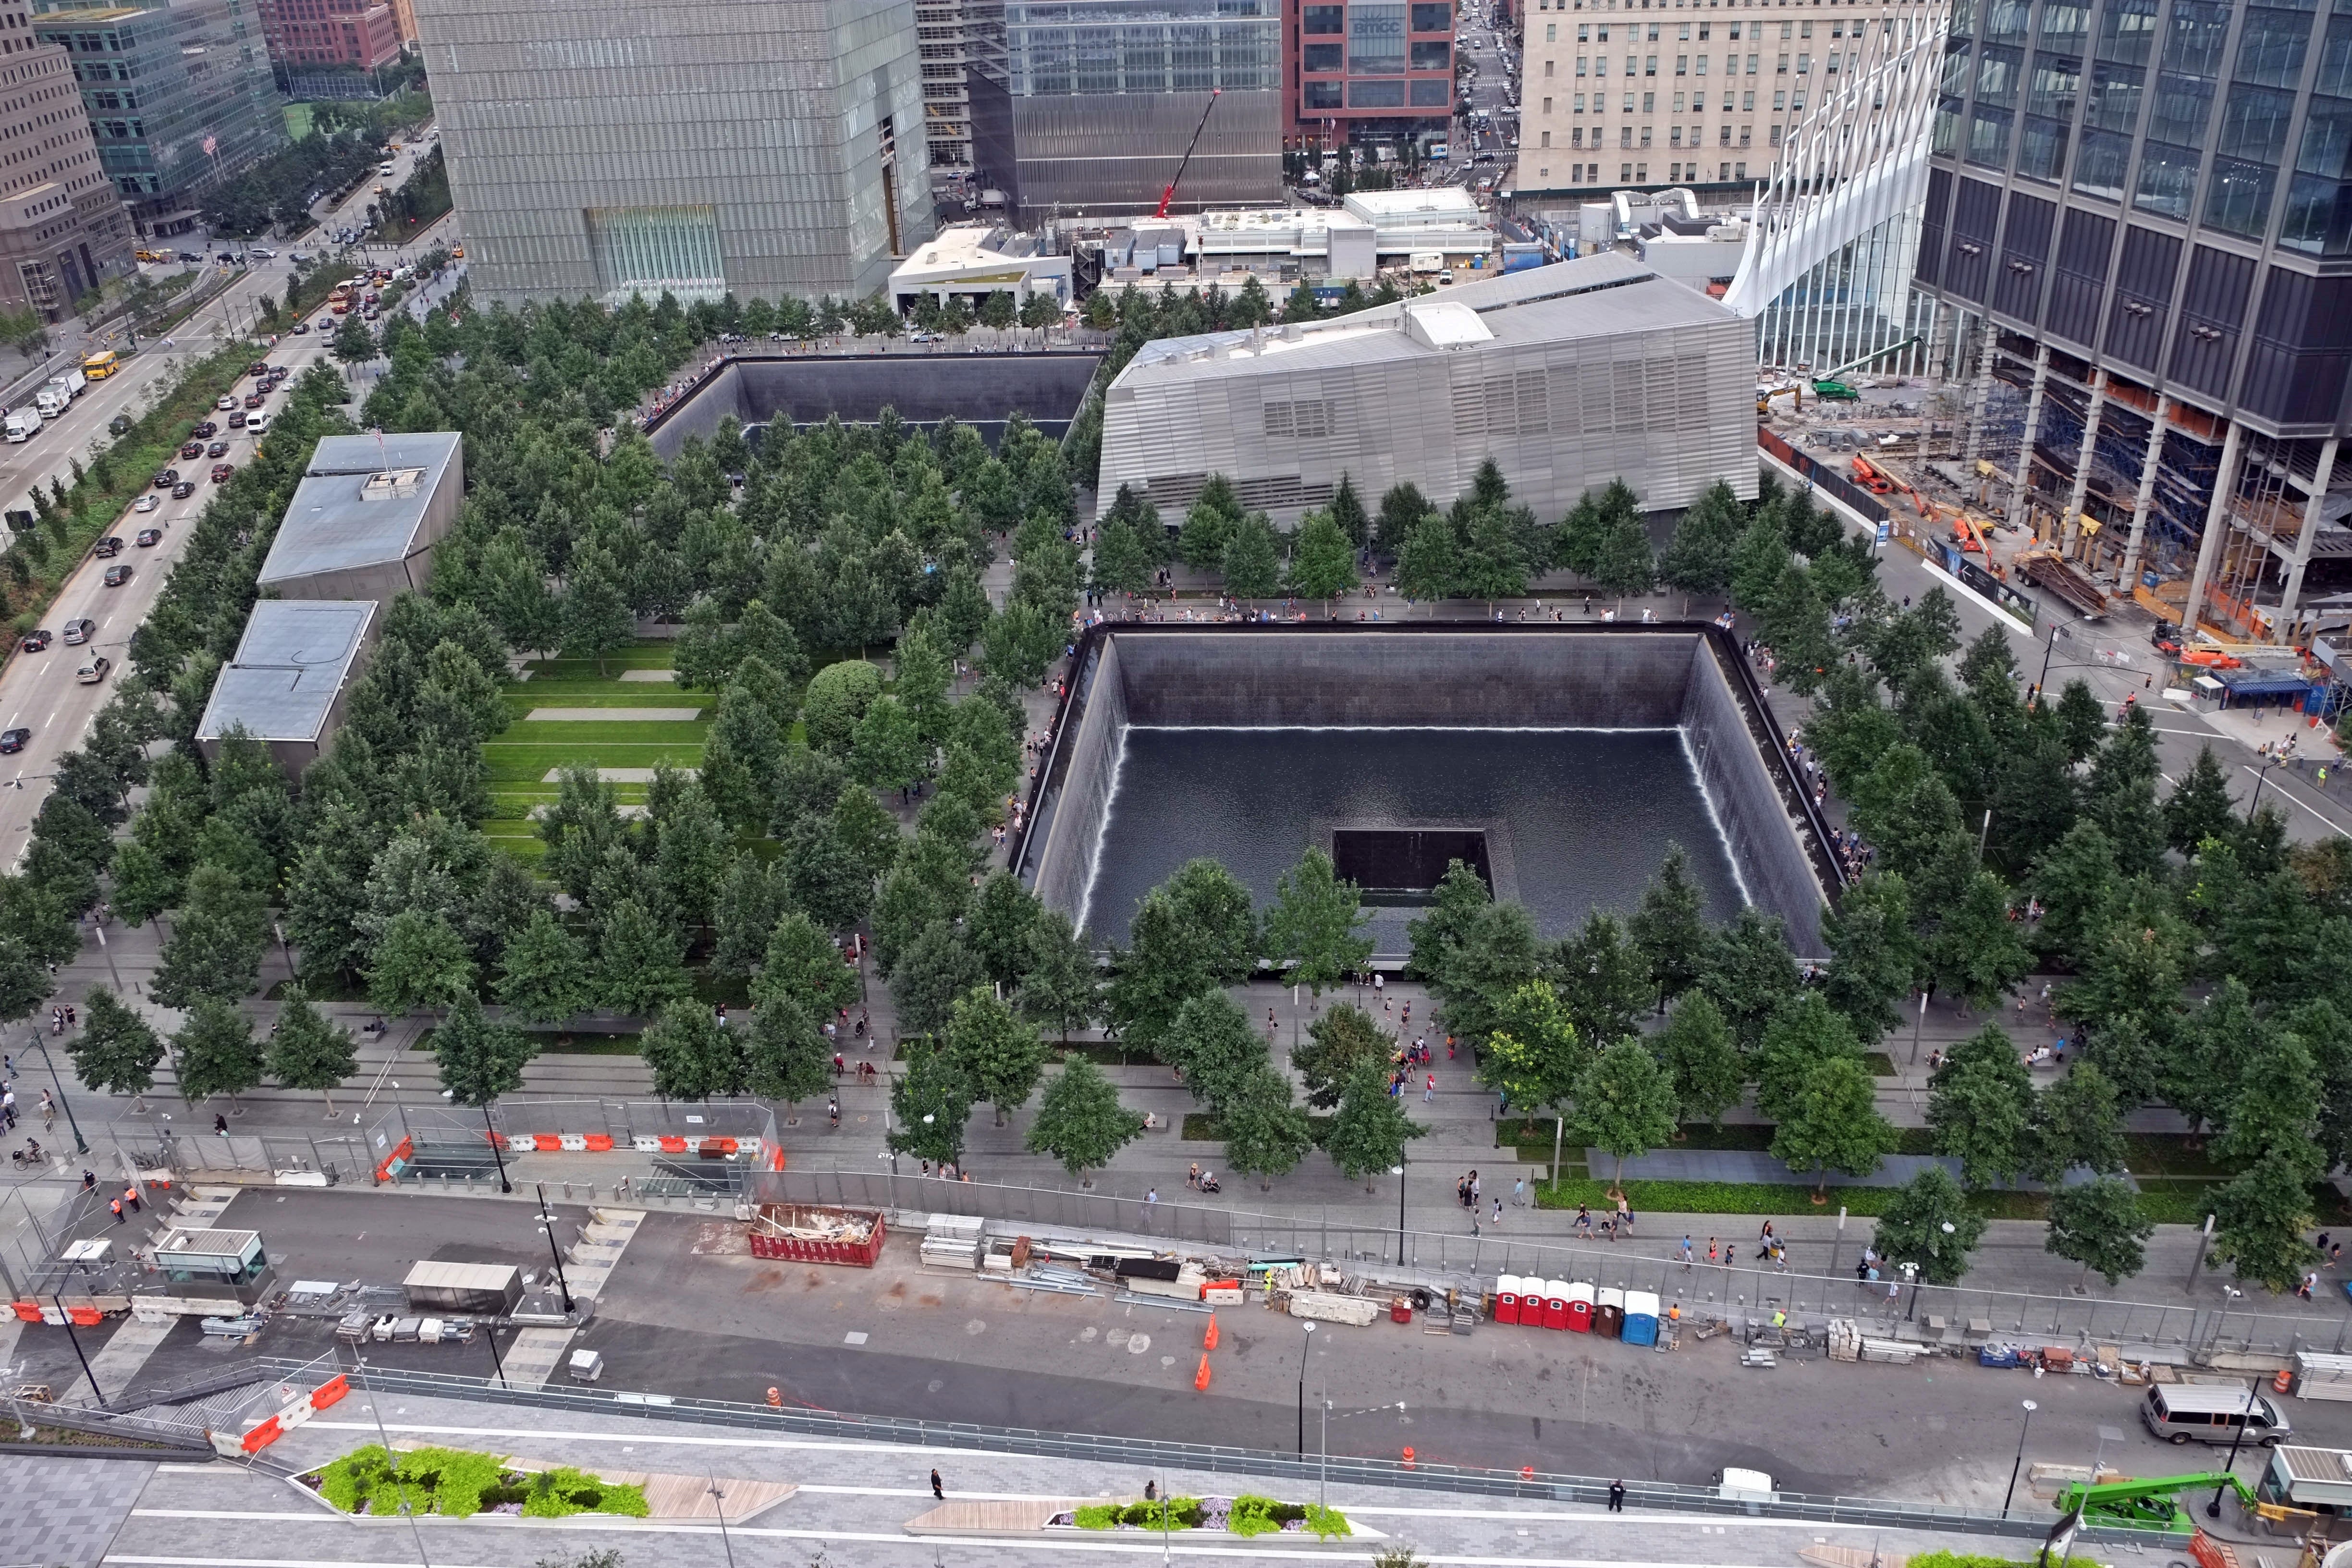 The remains of over 1000 victims are being held at the World Trade Center memorial waiting to be tested